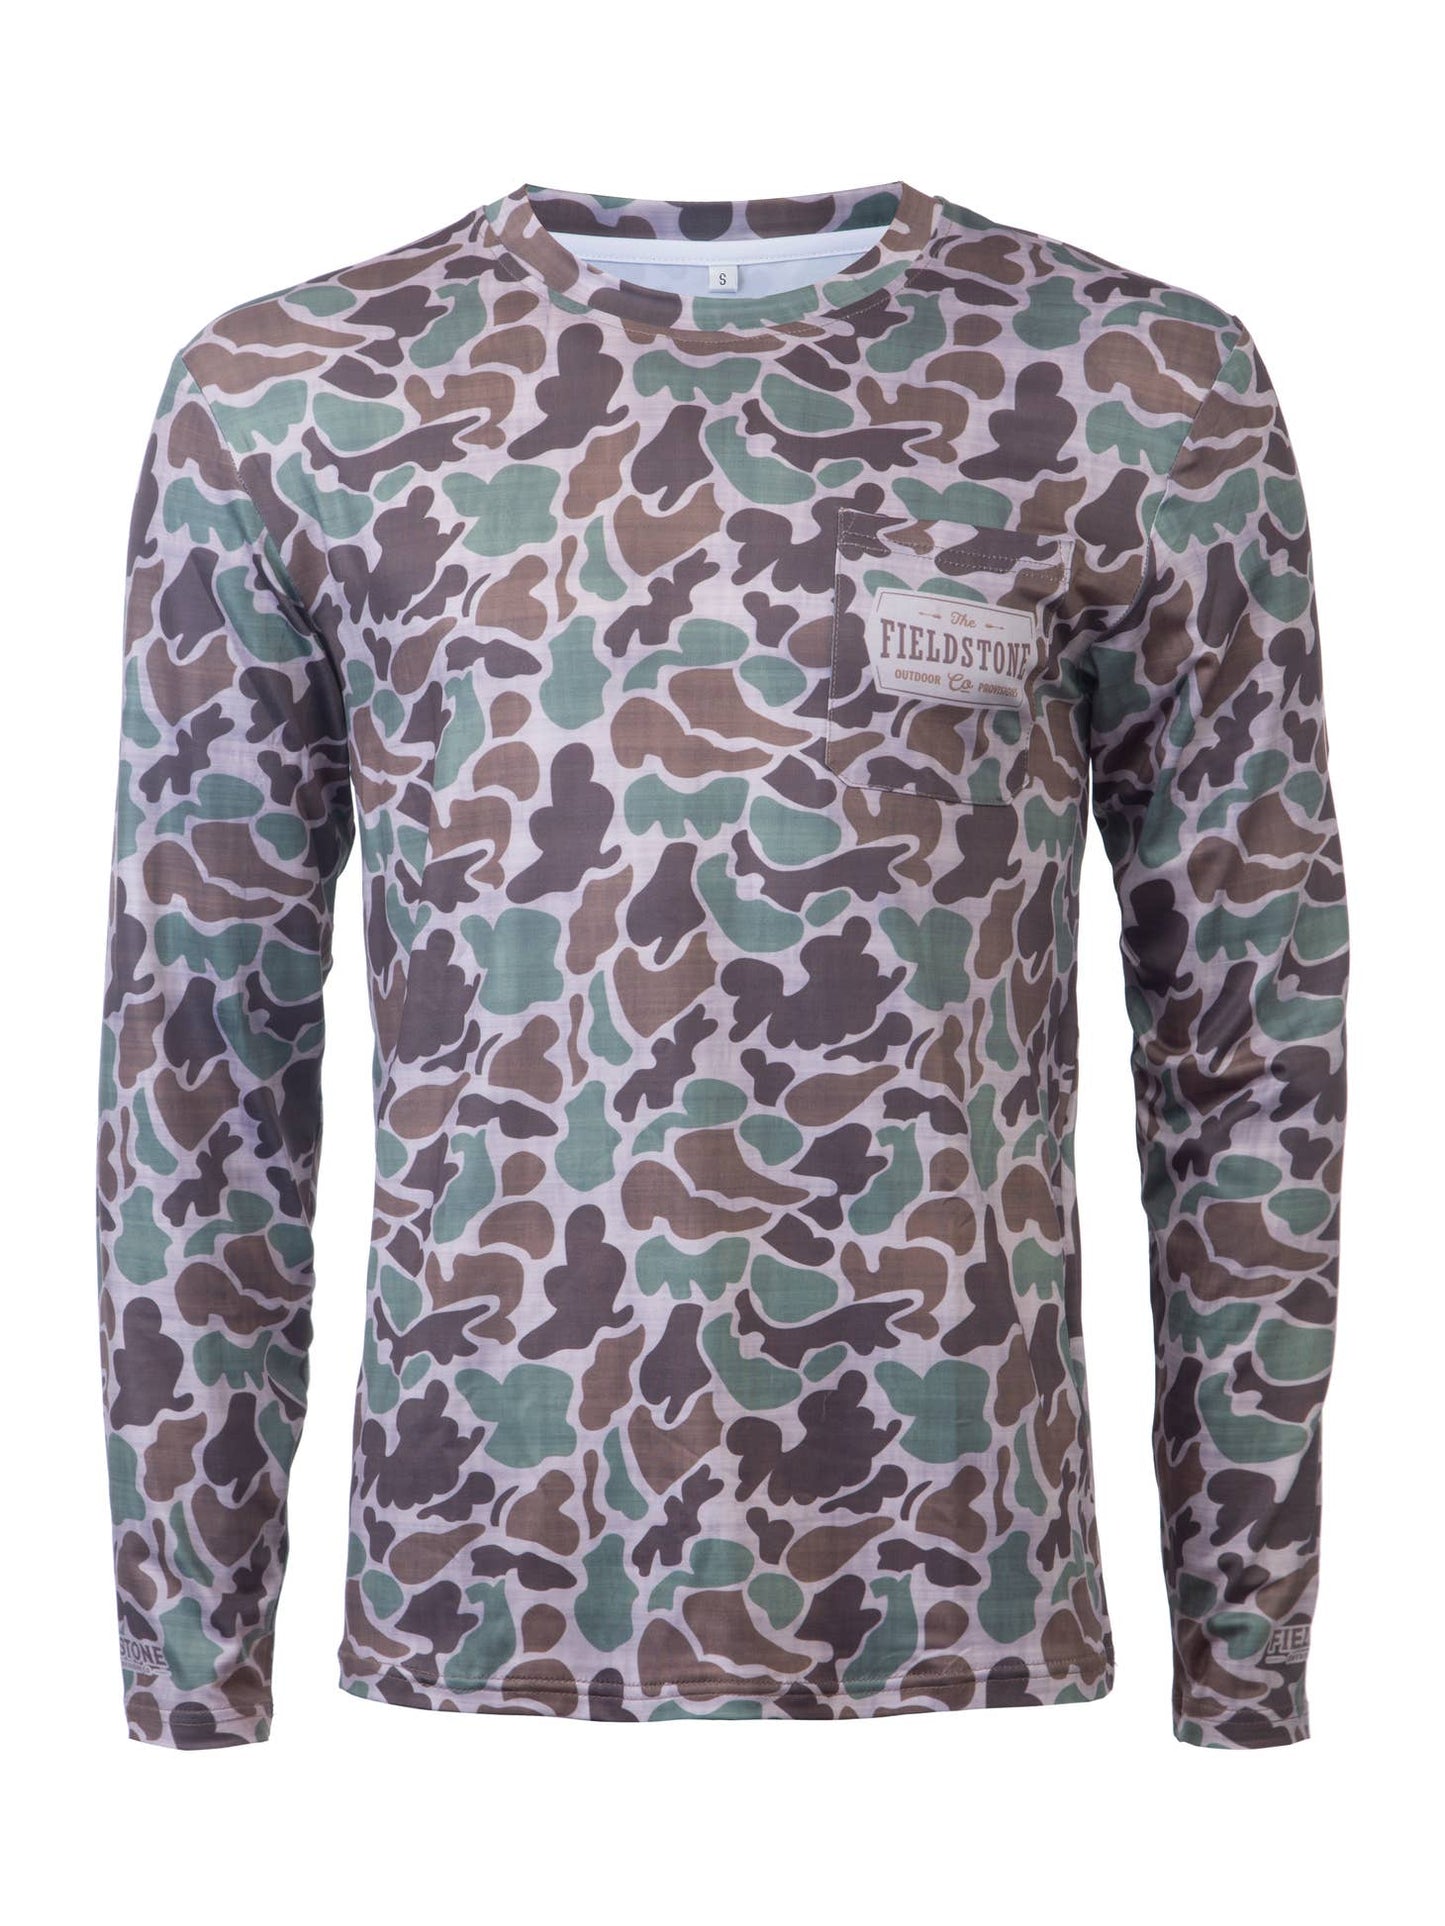 Dry-Fit Pocketed Long Sleeve Camo Tee / Fieldstone